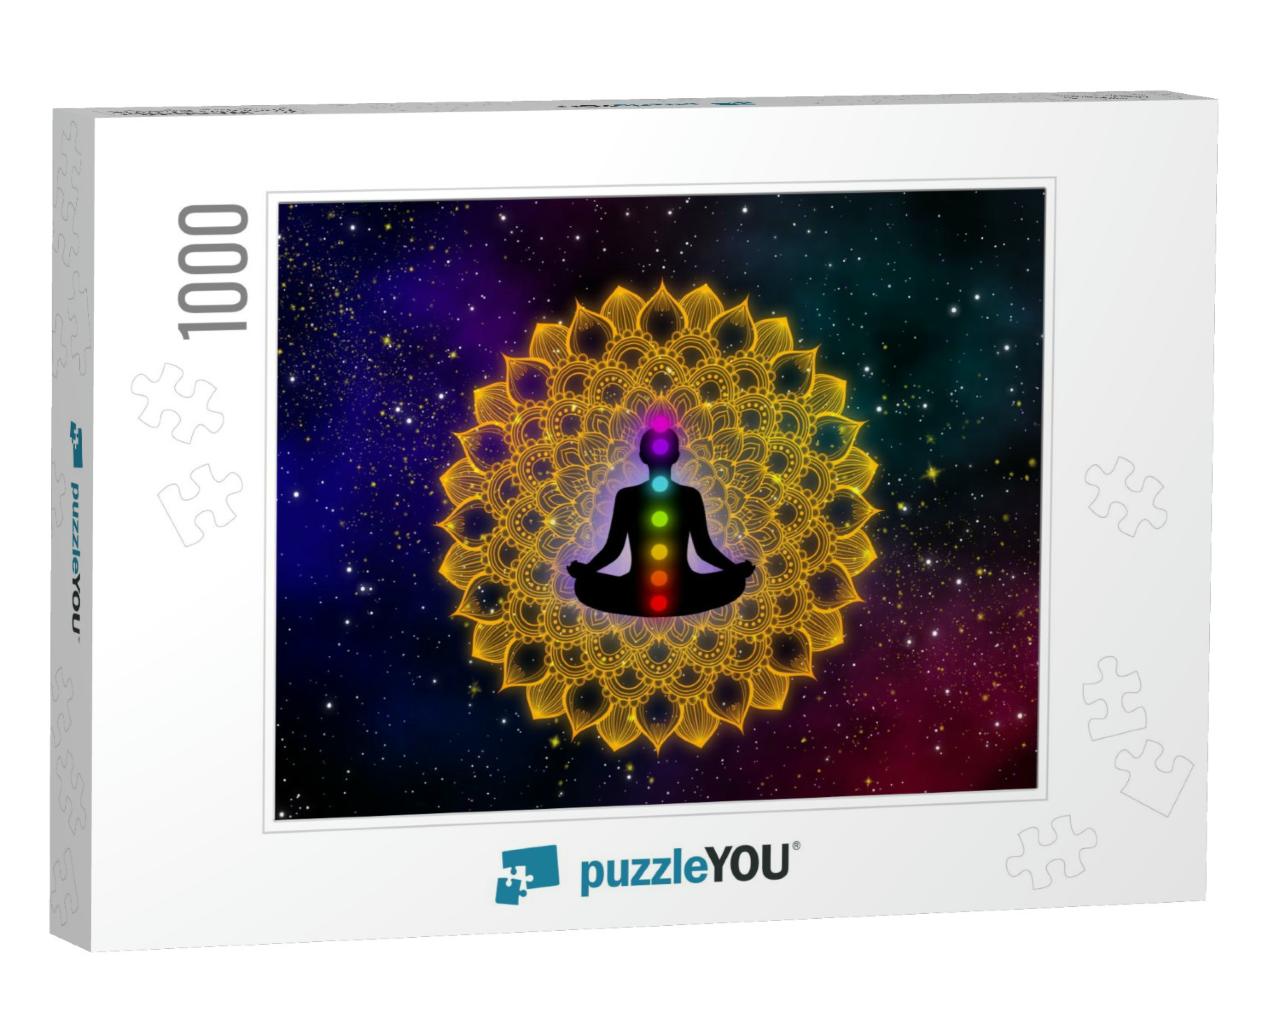 Silhouette Meditation Man & His Seven Chakra on Luxury Go... Jigsaw Puzzle with 1000 pieces